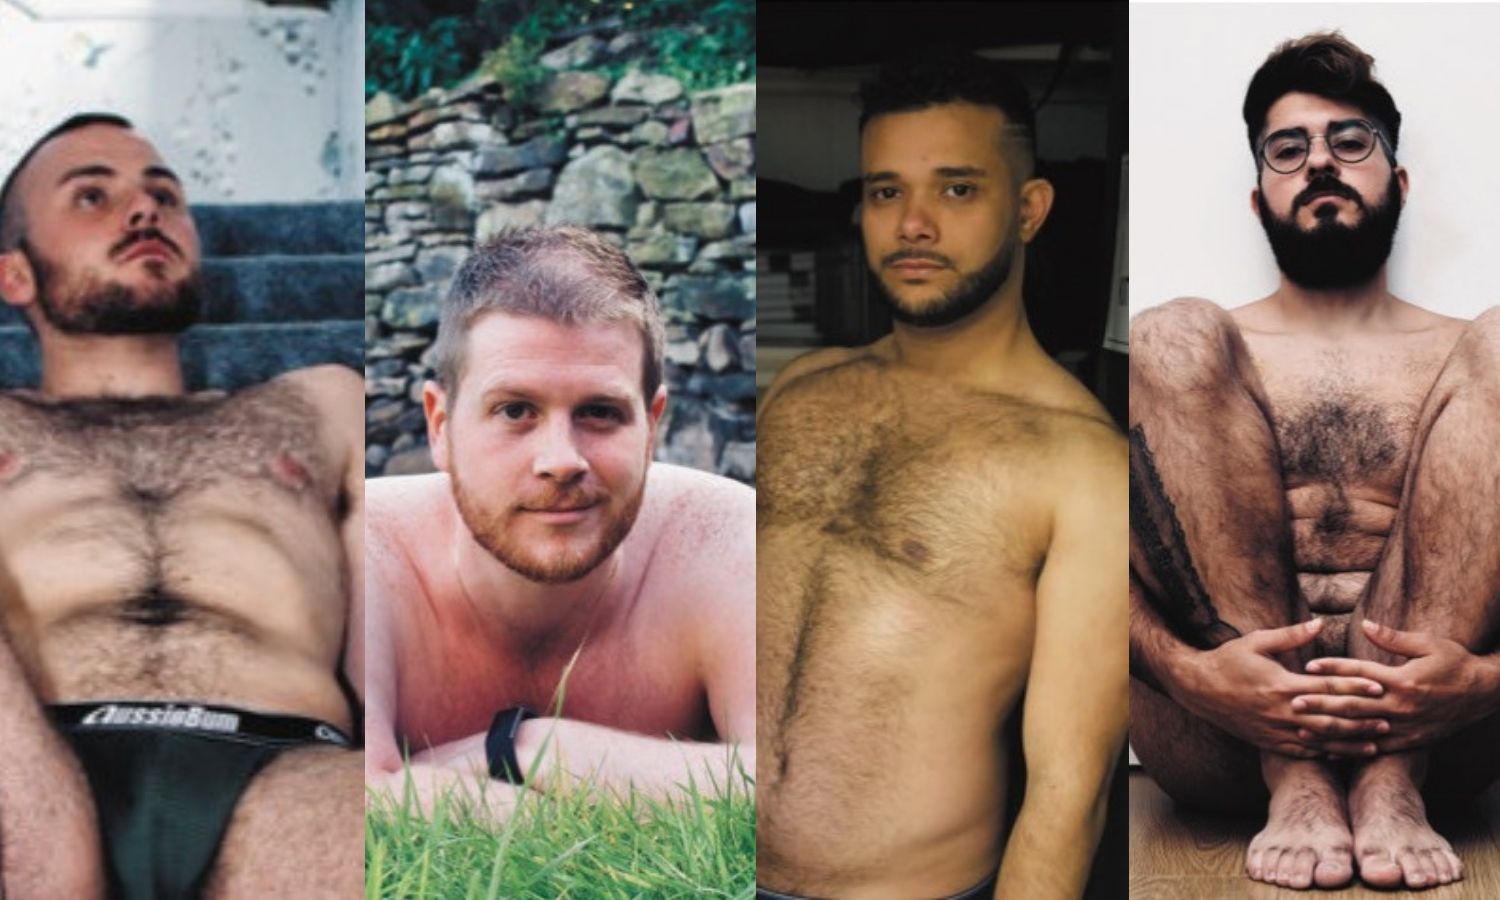 Meet the 12 guys who stripped off for a brand new calendar, celebrating body positivity in 2020